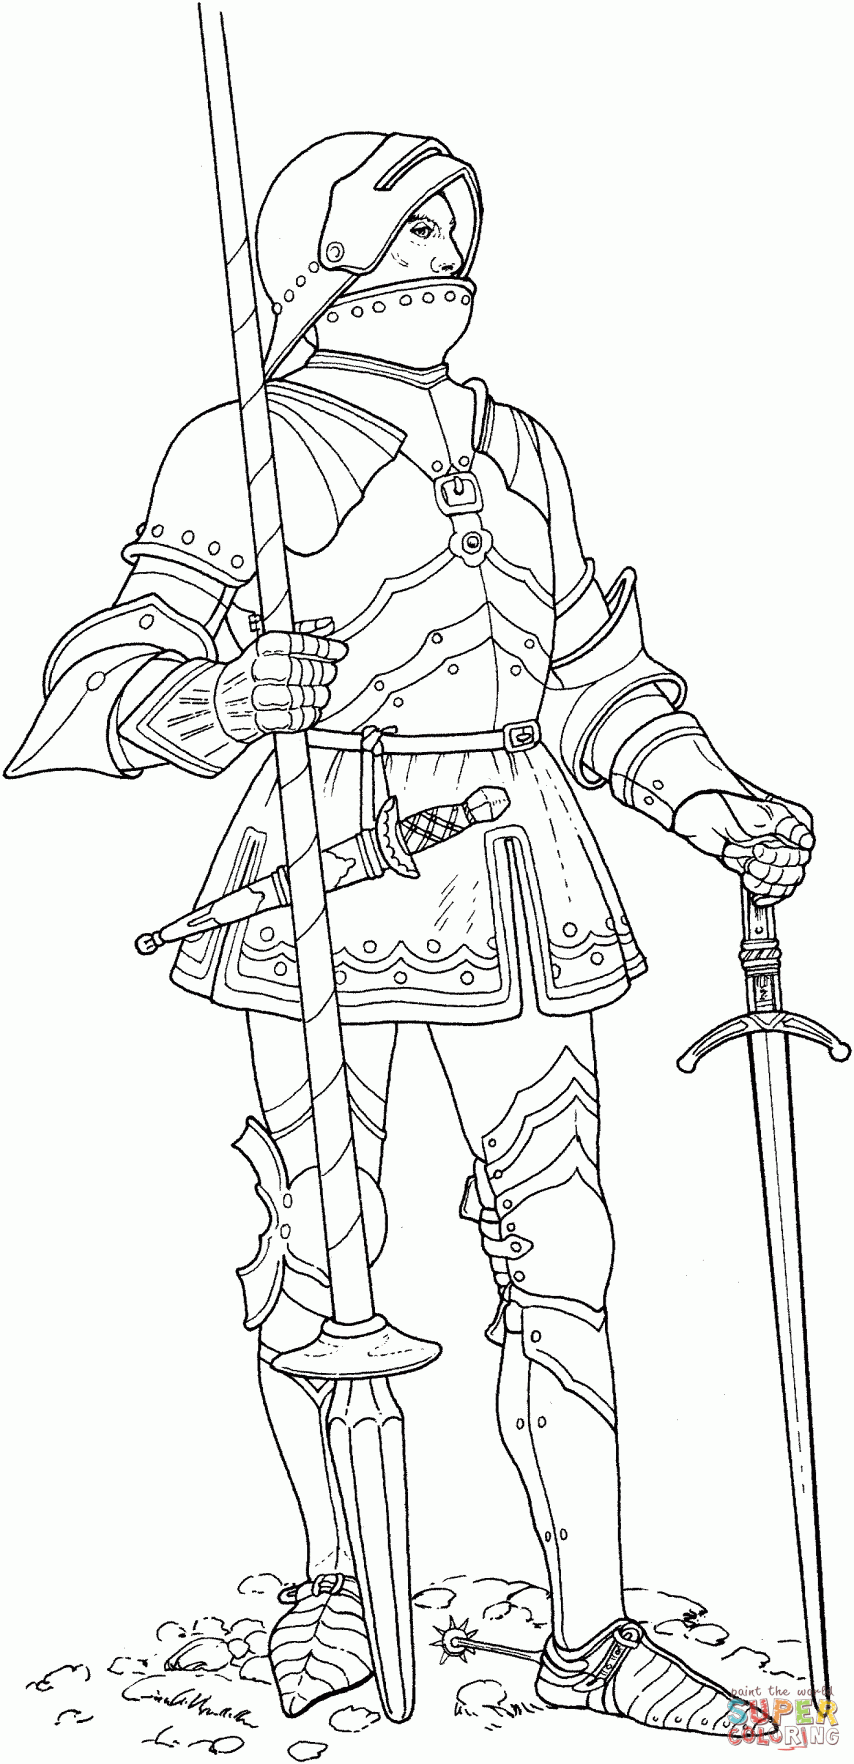 25 Printable Coloring Pages for Kids for: Knight Coloring ...